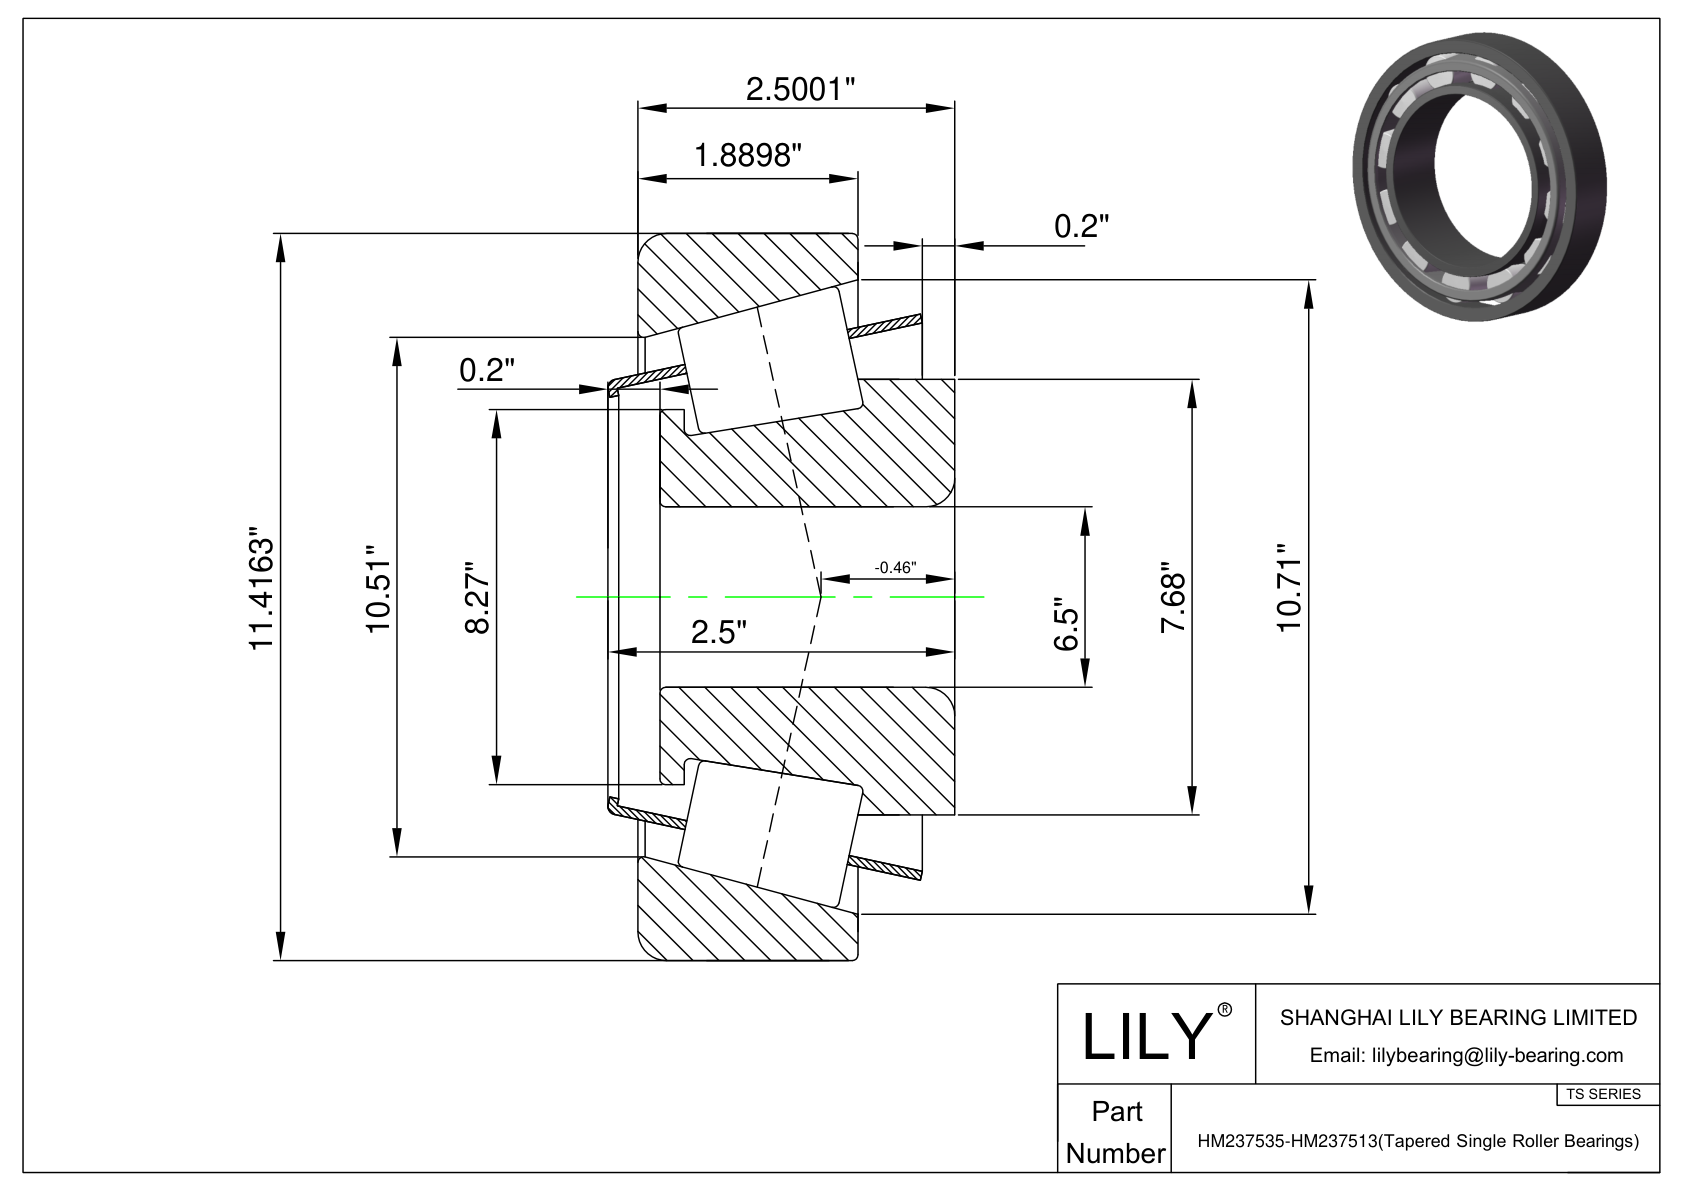 HM237535-HM237513 TS (Tapered Single Roller Bearings) (Imperial) cad drawing